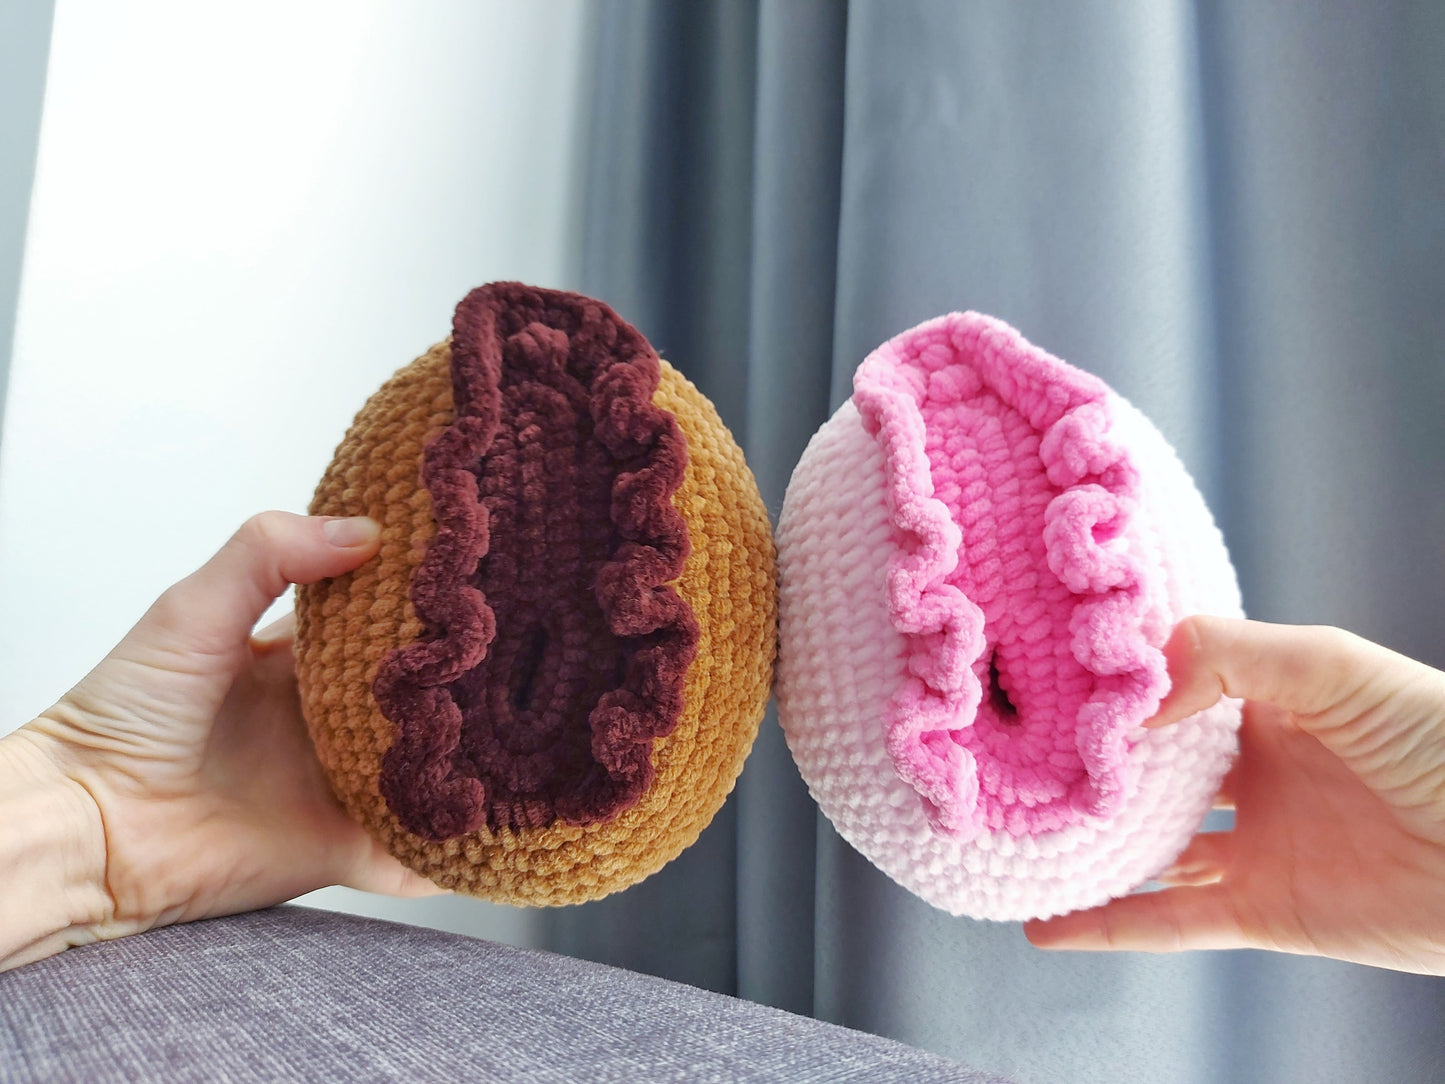 Crochet plushie penis and vulva pattern, crochet vagina pattern, Amigurumi pattern pdf, penis Pdf photo tutorial, Funny mature gift for her